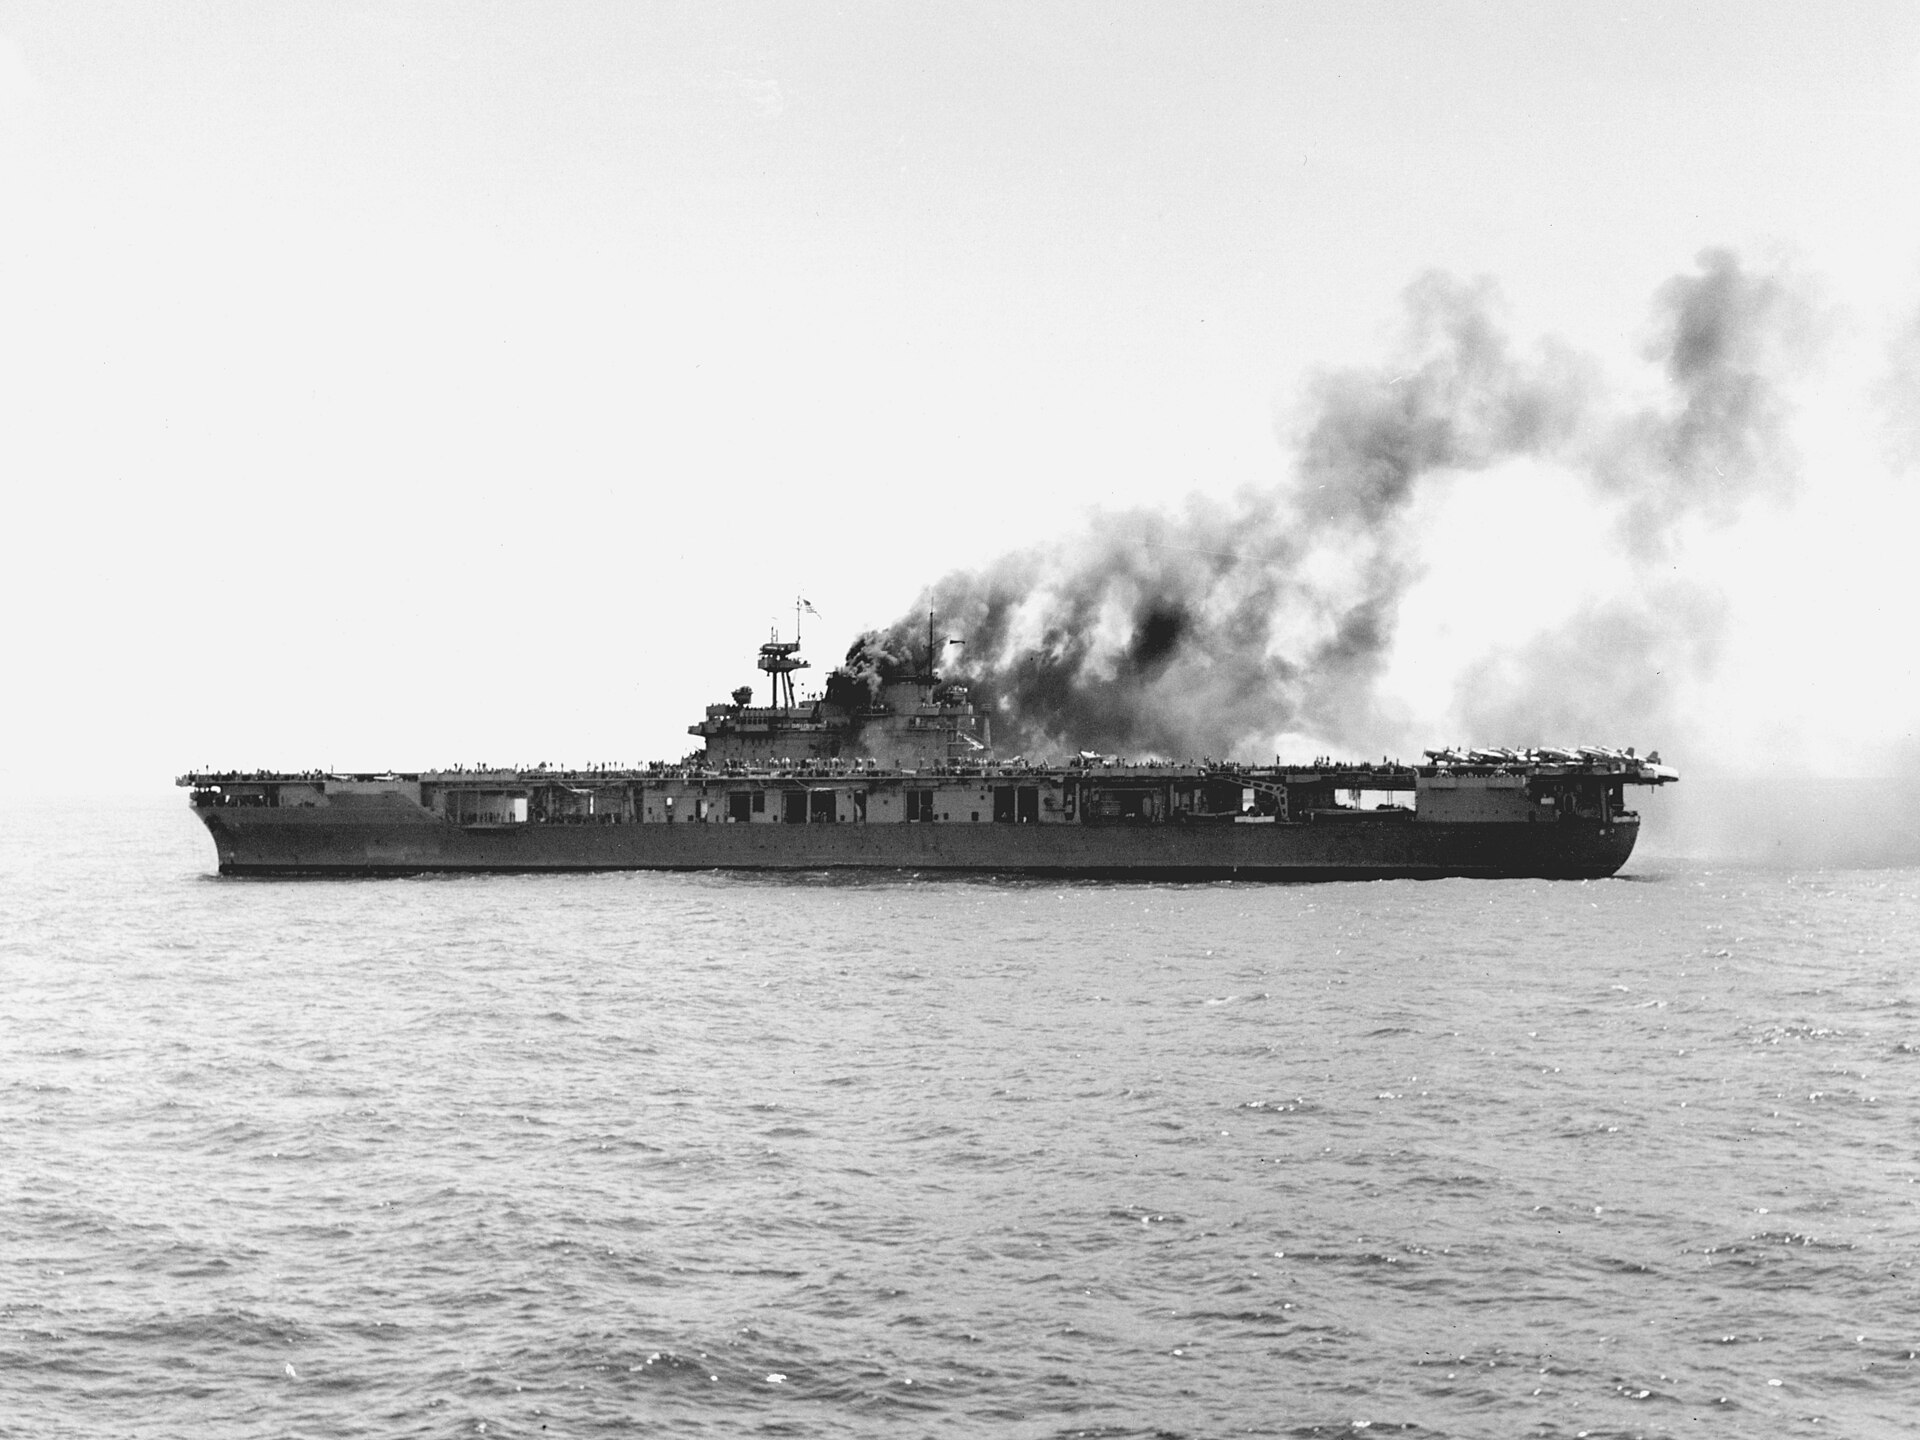 USS_Yorktown_(CV-5)_burning_after_the_first_attack_by_Japanese_dive_bo